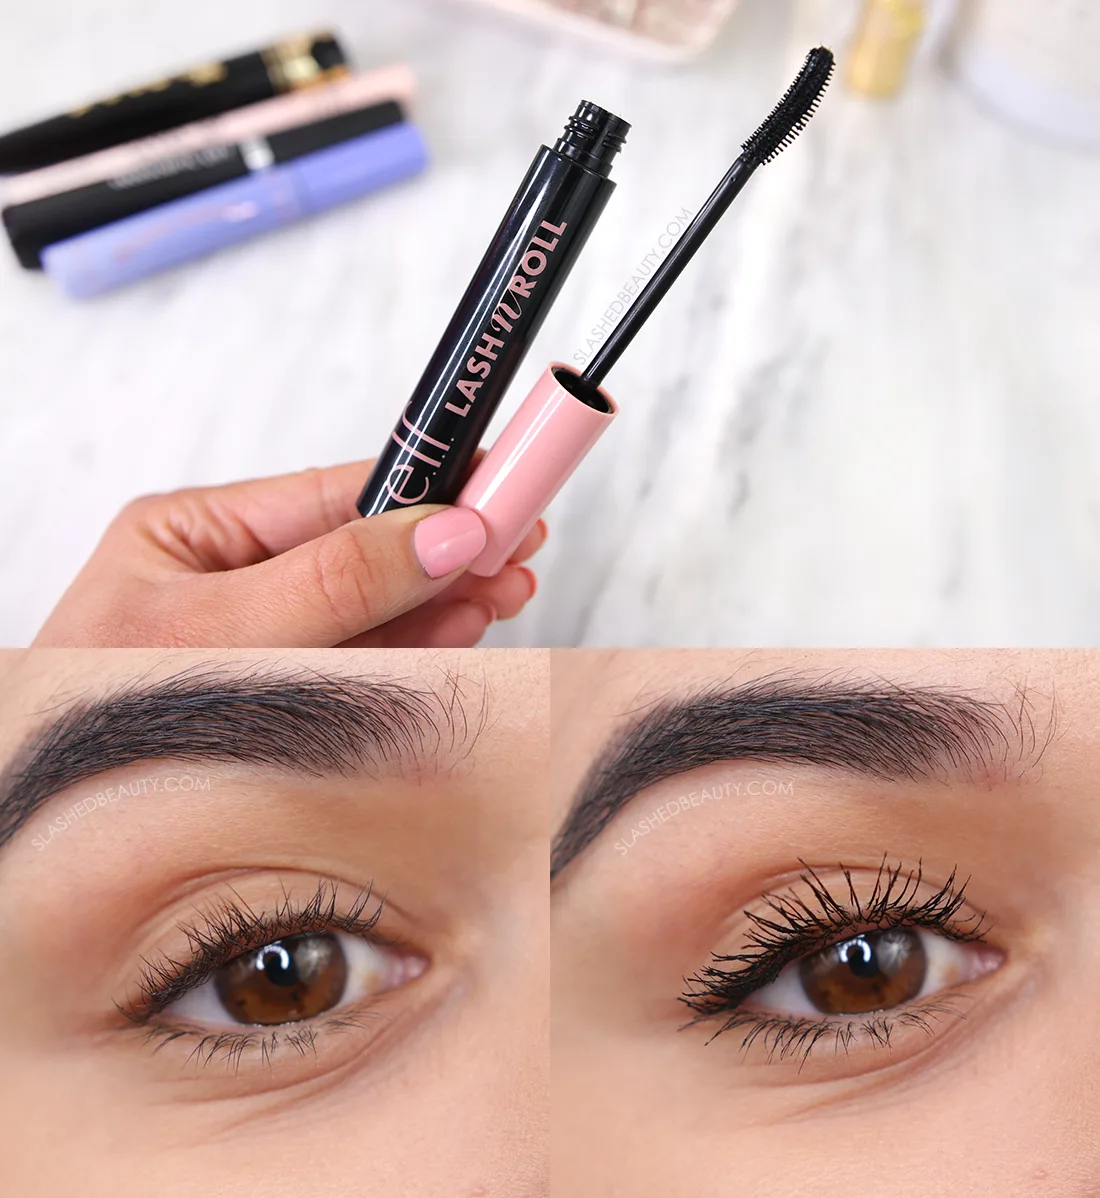 Open tube of elf Lash N Roll mascara with close up before & after | The 5 Best Drugstore Mascaras for Short Lashes in 2023 | Slashed Beauty